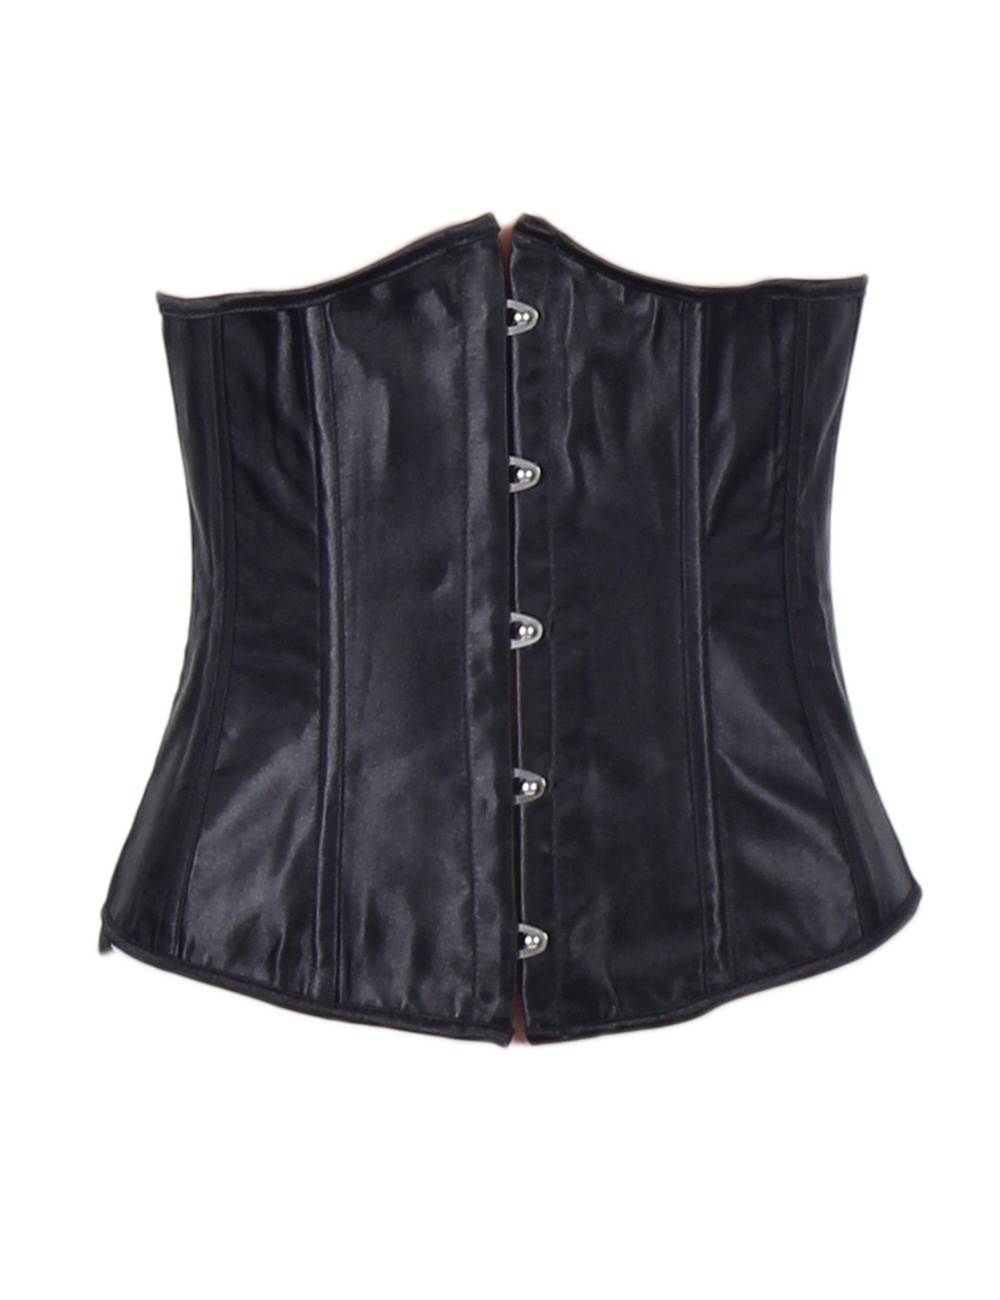 Sexy Strapless Black Leather Corset Top | Ohyeah